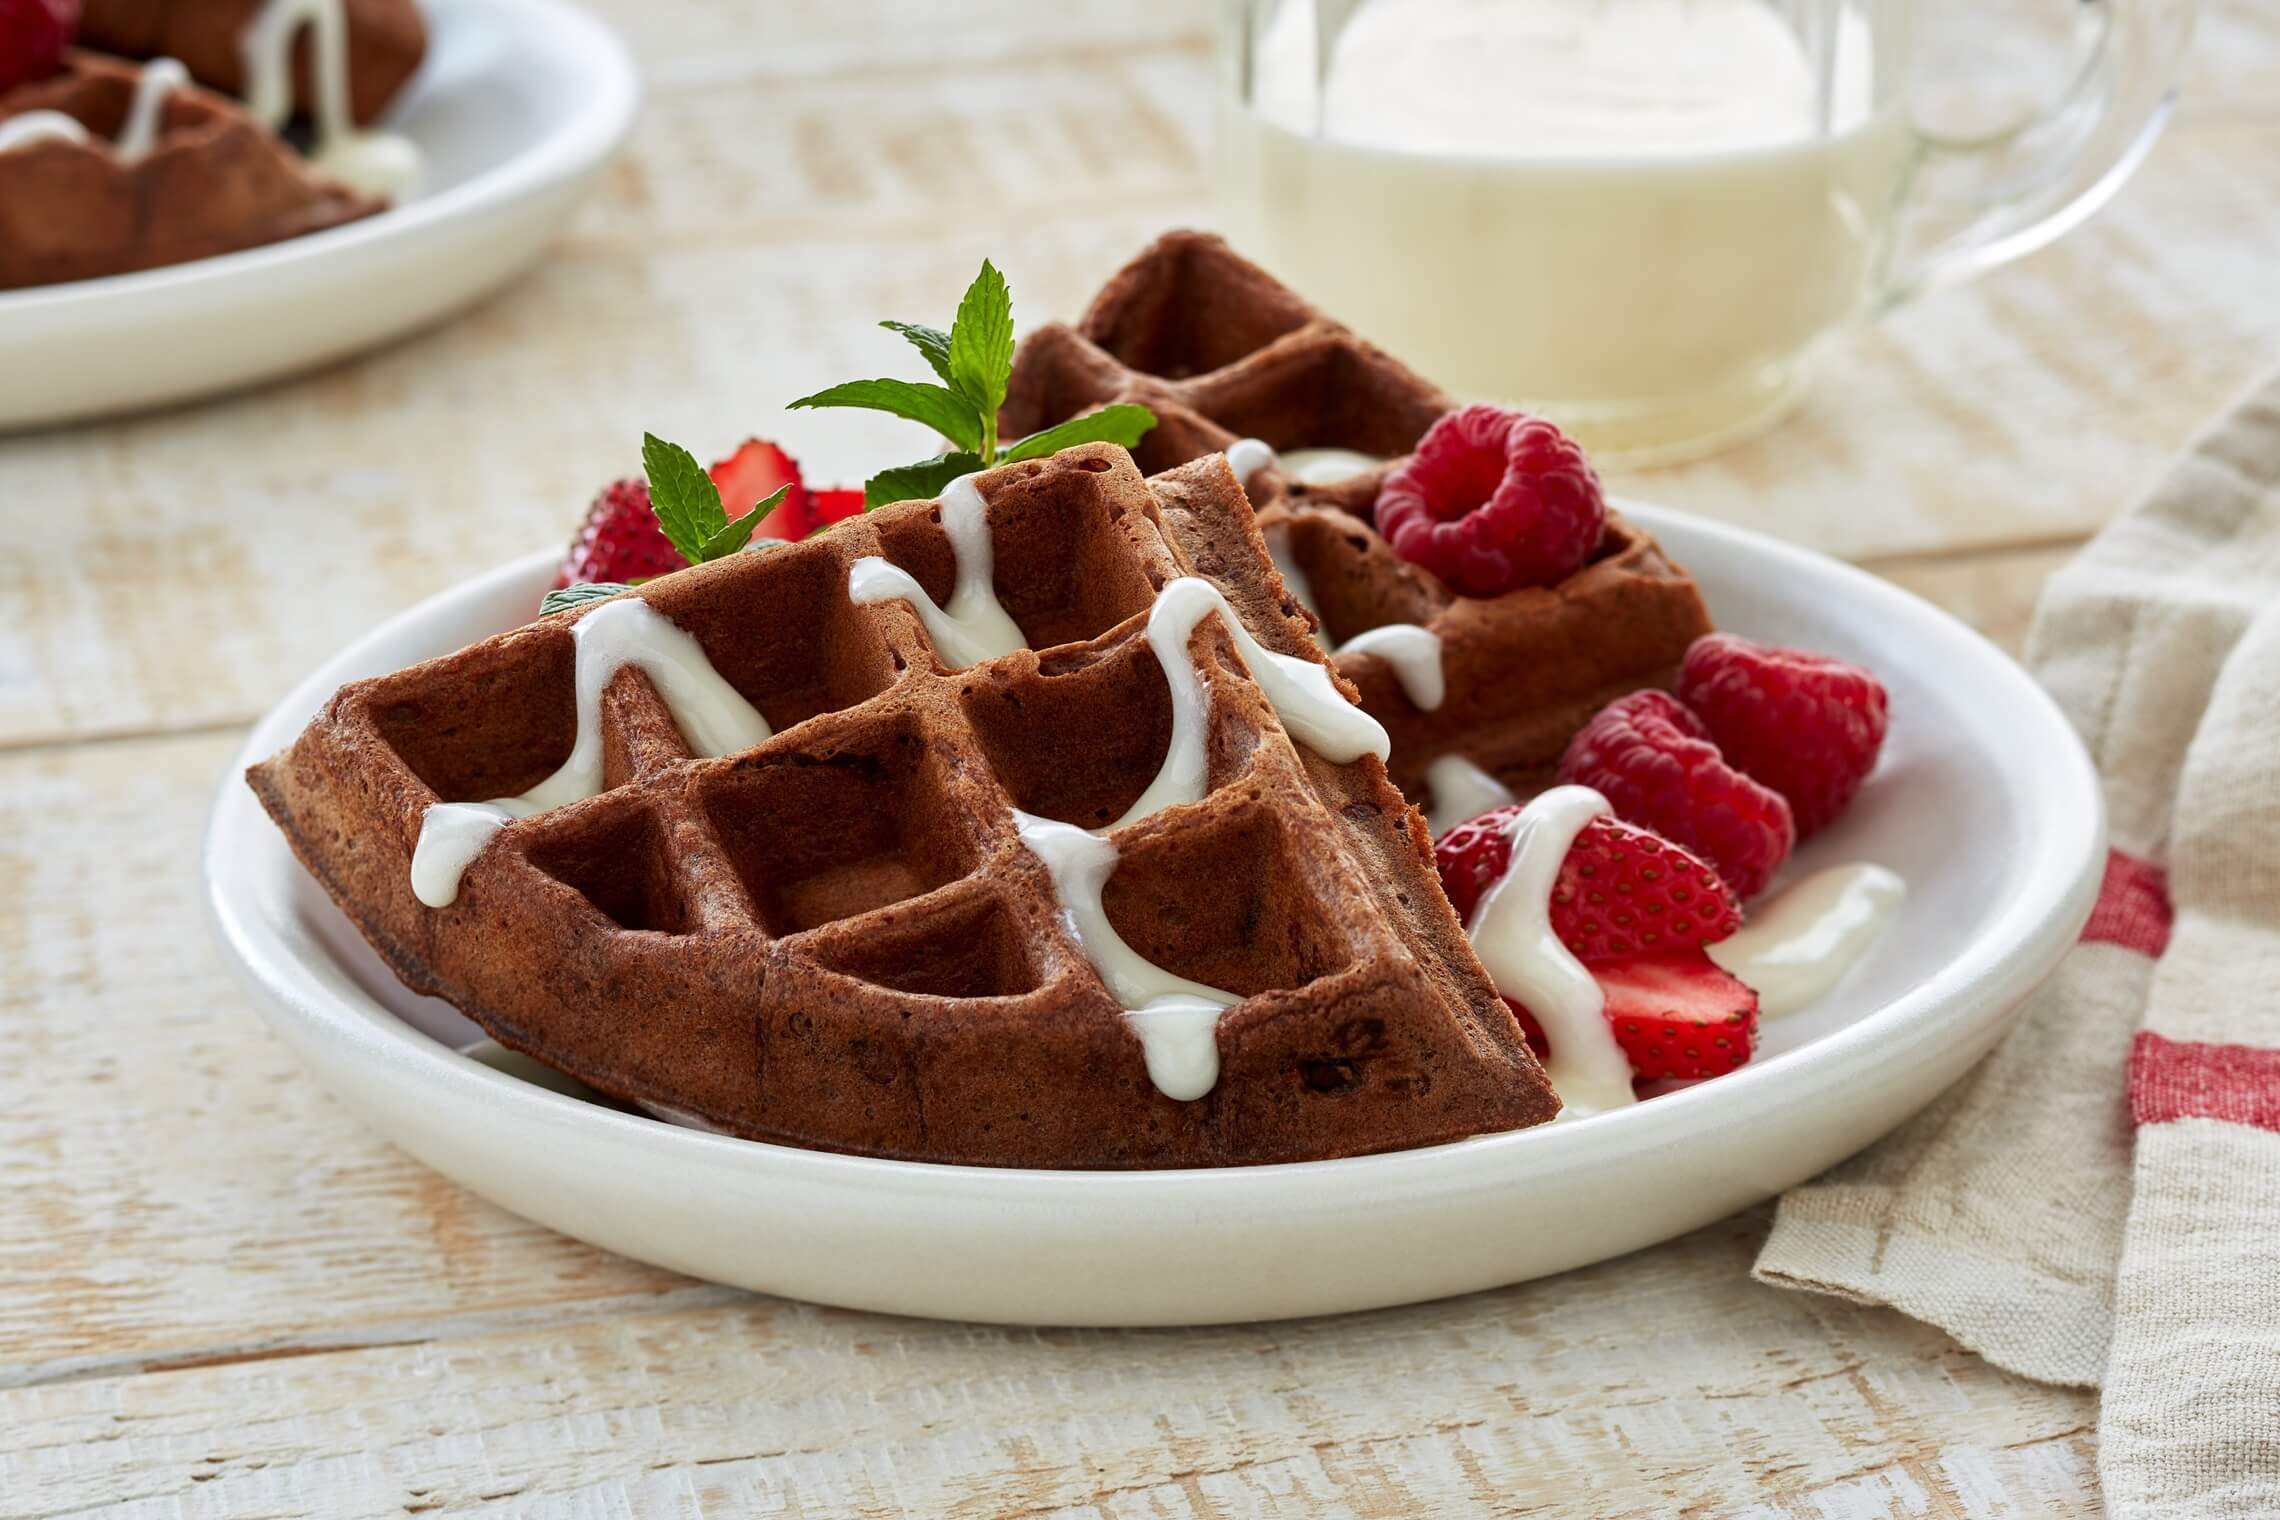 Variations Of Chocolate Waffles